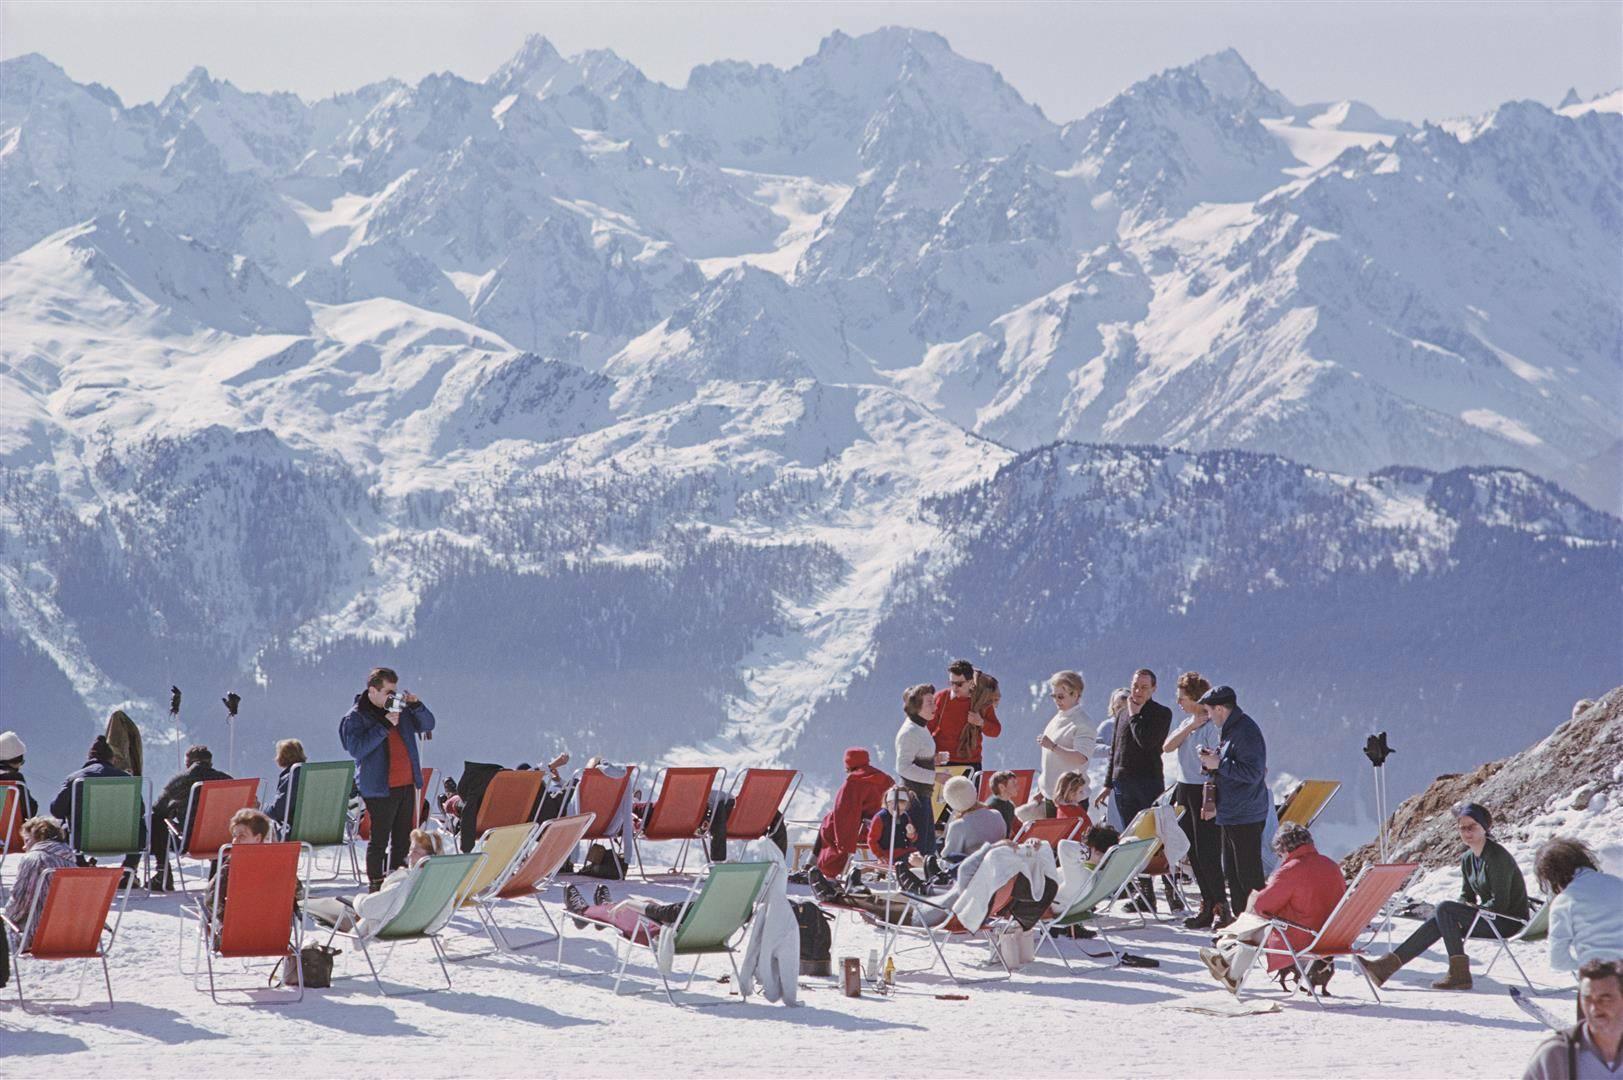 'Lounging In Verbier' by Slim Aarons

Holidaymakers in sun loungers on the slopes at Verbier, Switzerland, February 1964.

This photograph epitomises the Travel, Lifestyle and Glamour of the period's wealthy and famous, and spirit of vacation,